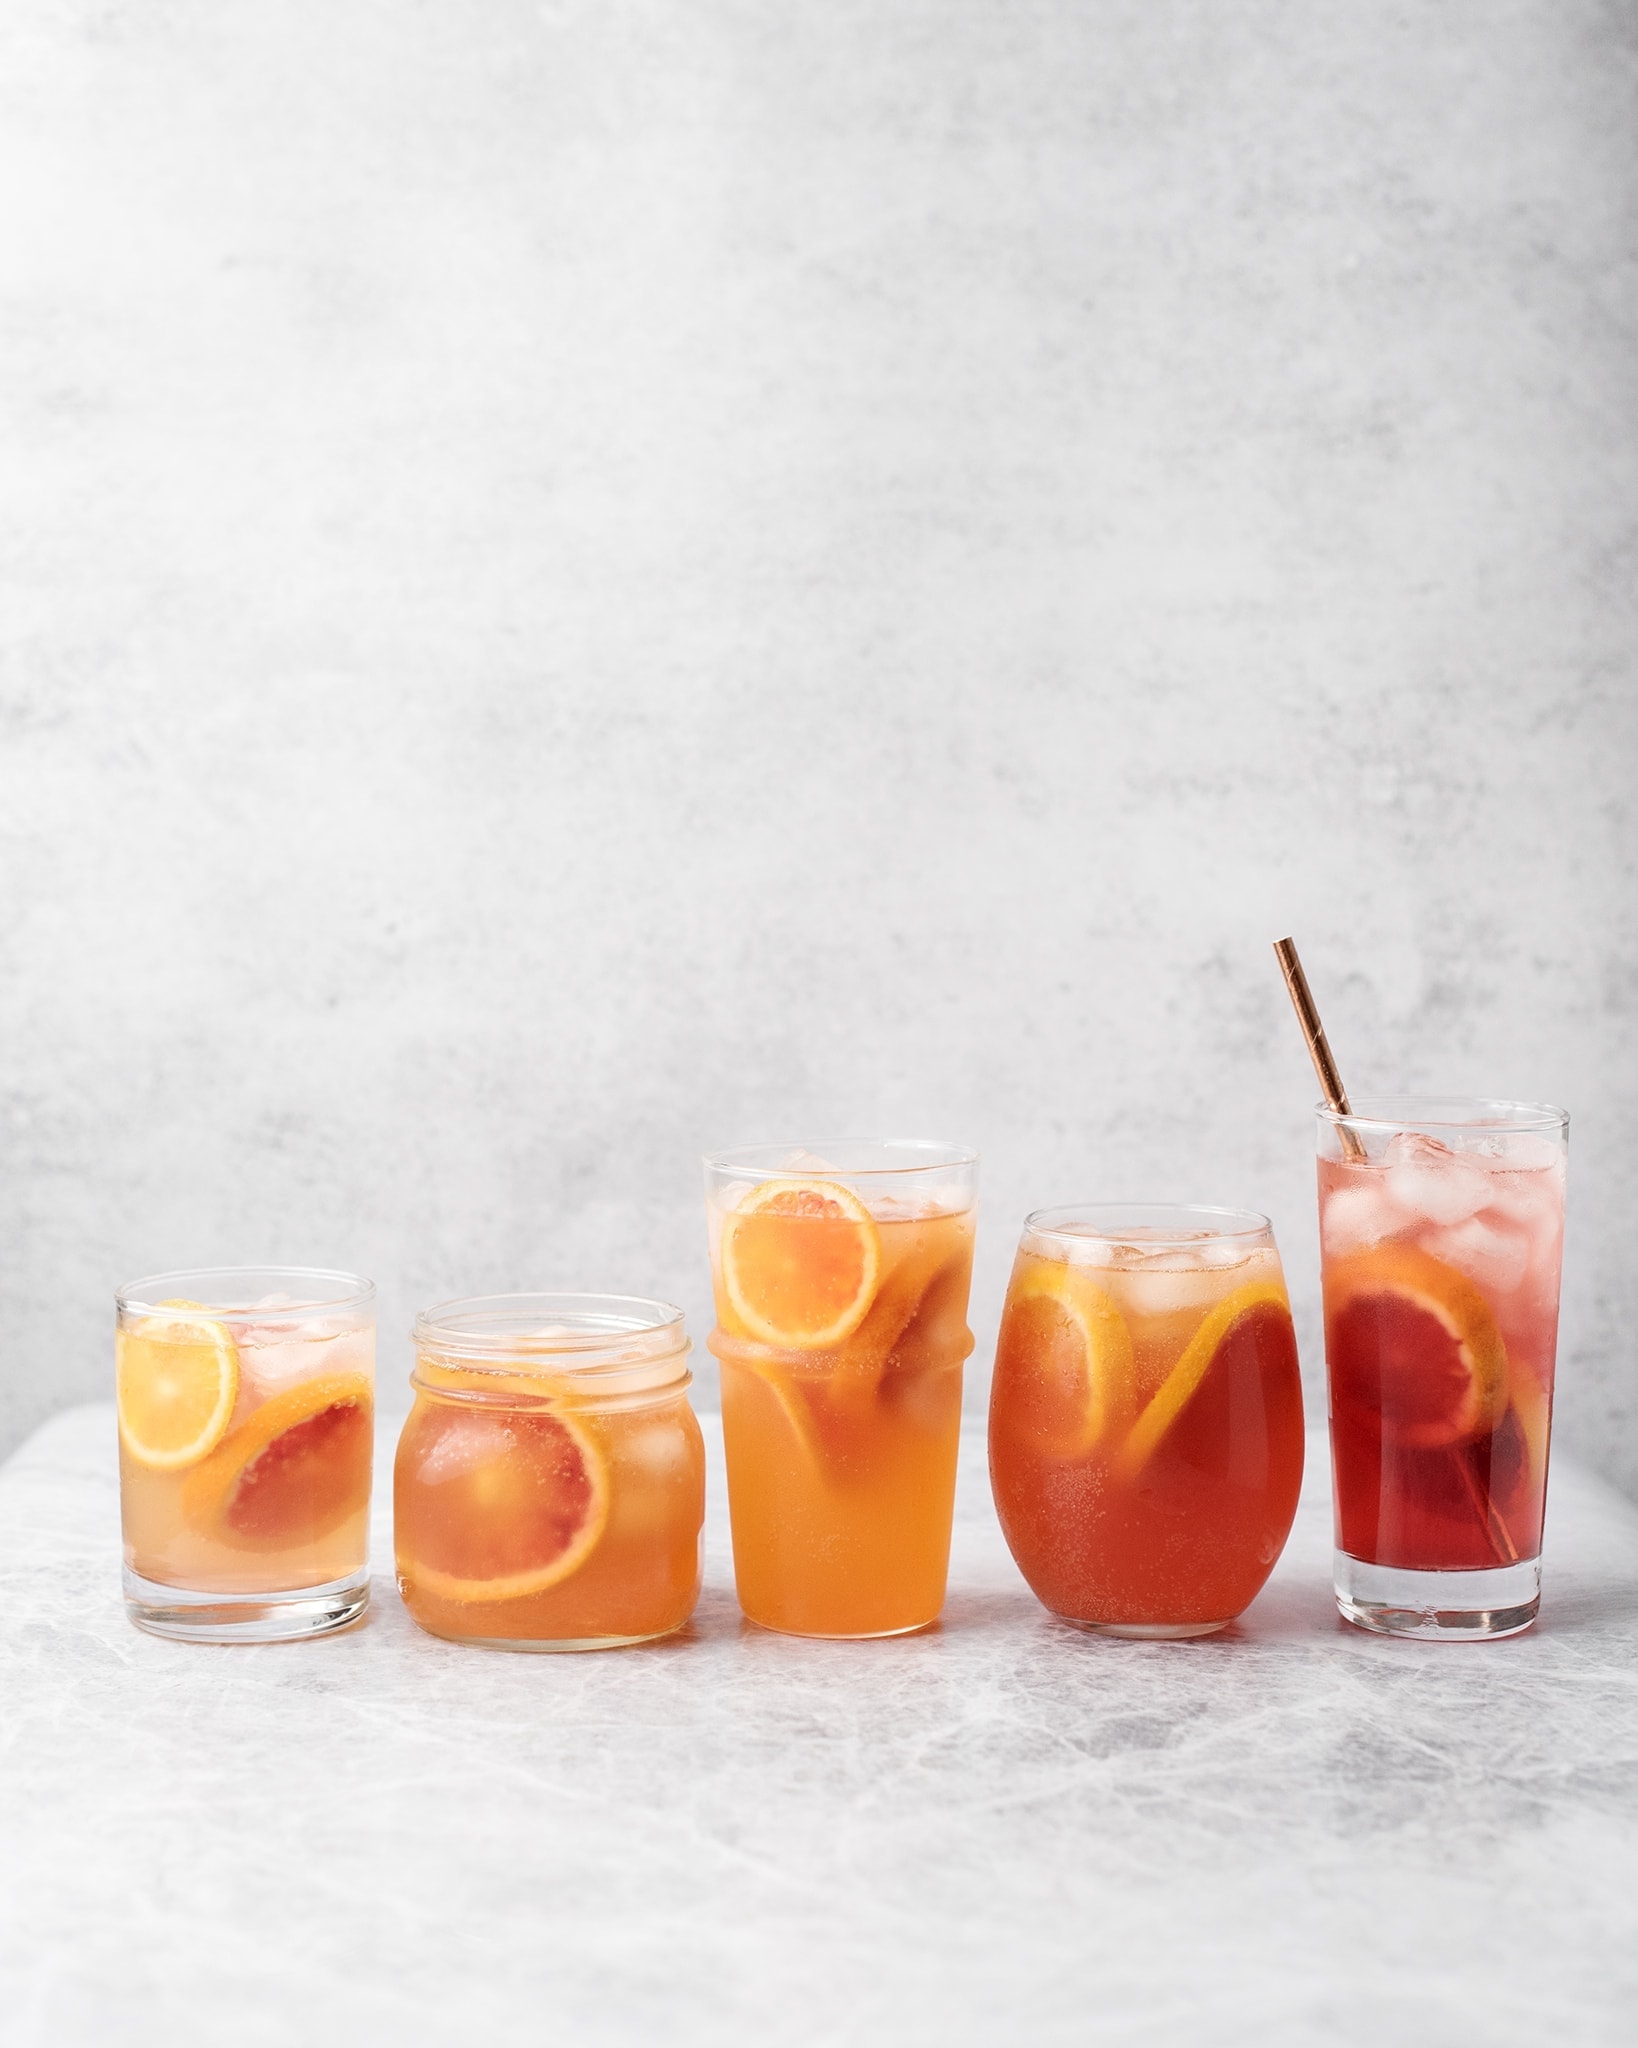 Glasses of blood orange palomas lined up as a gradient on a grey background